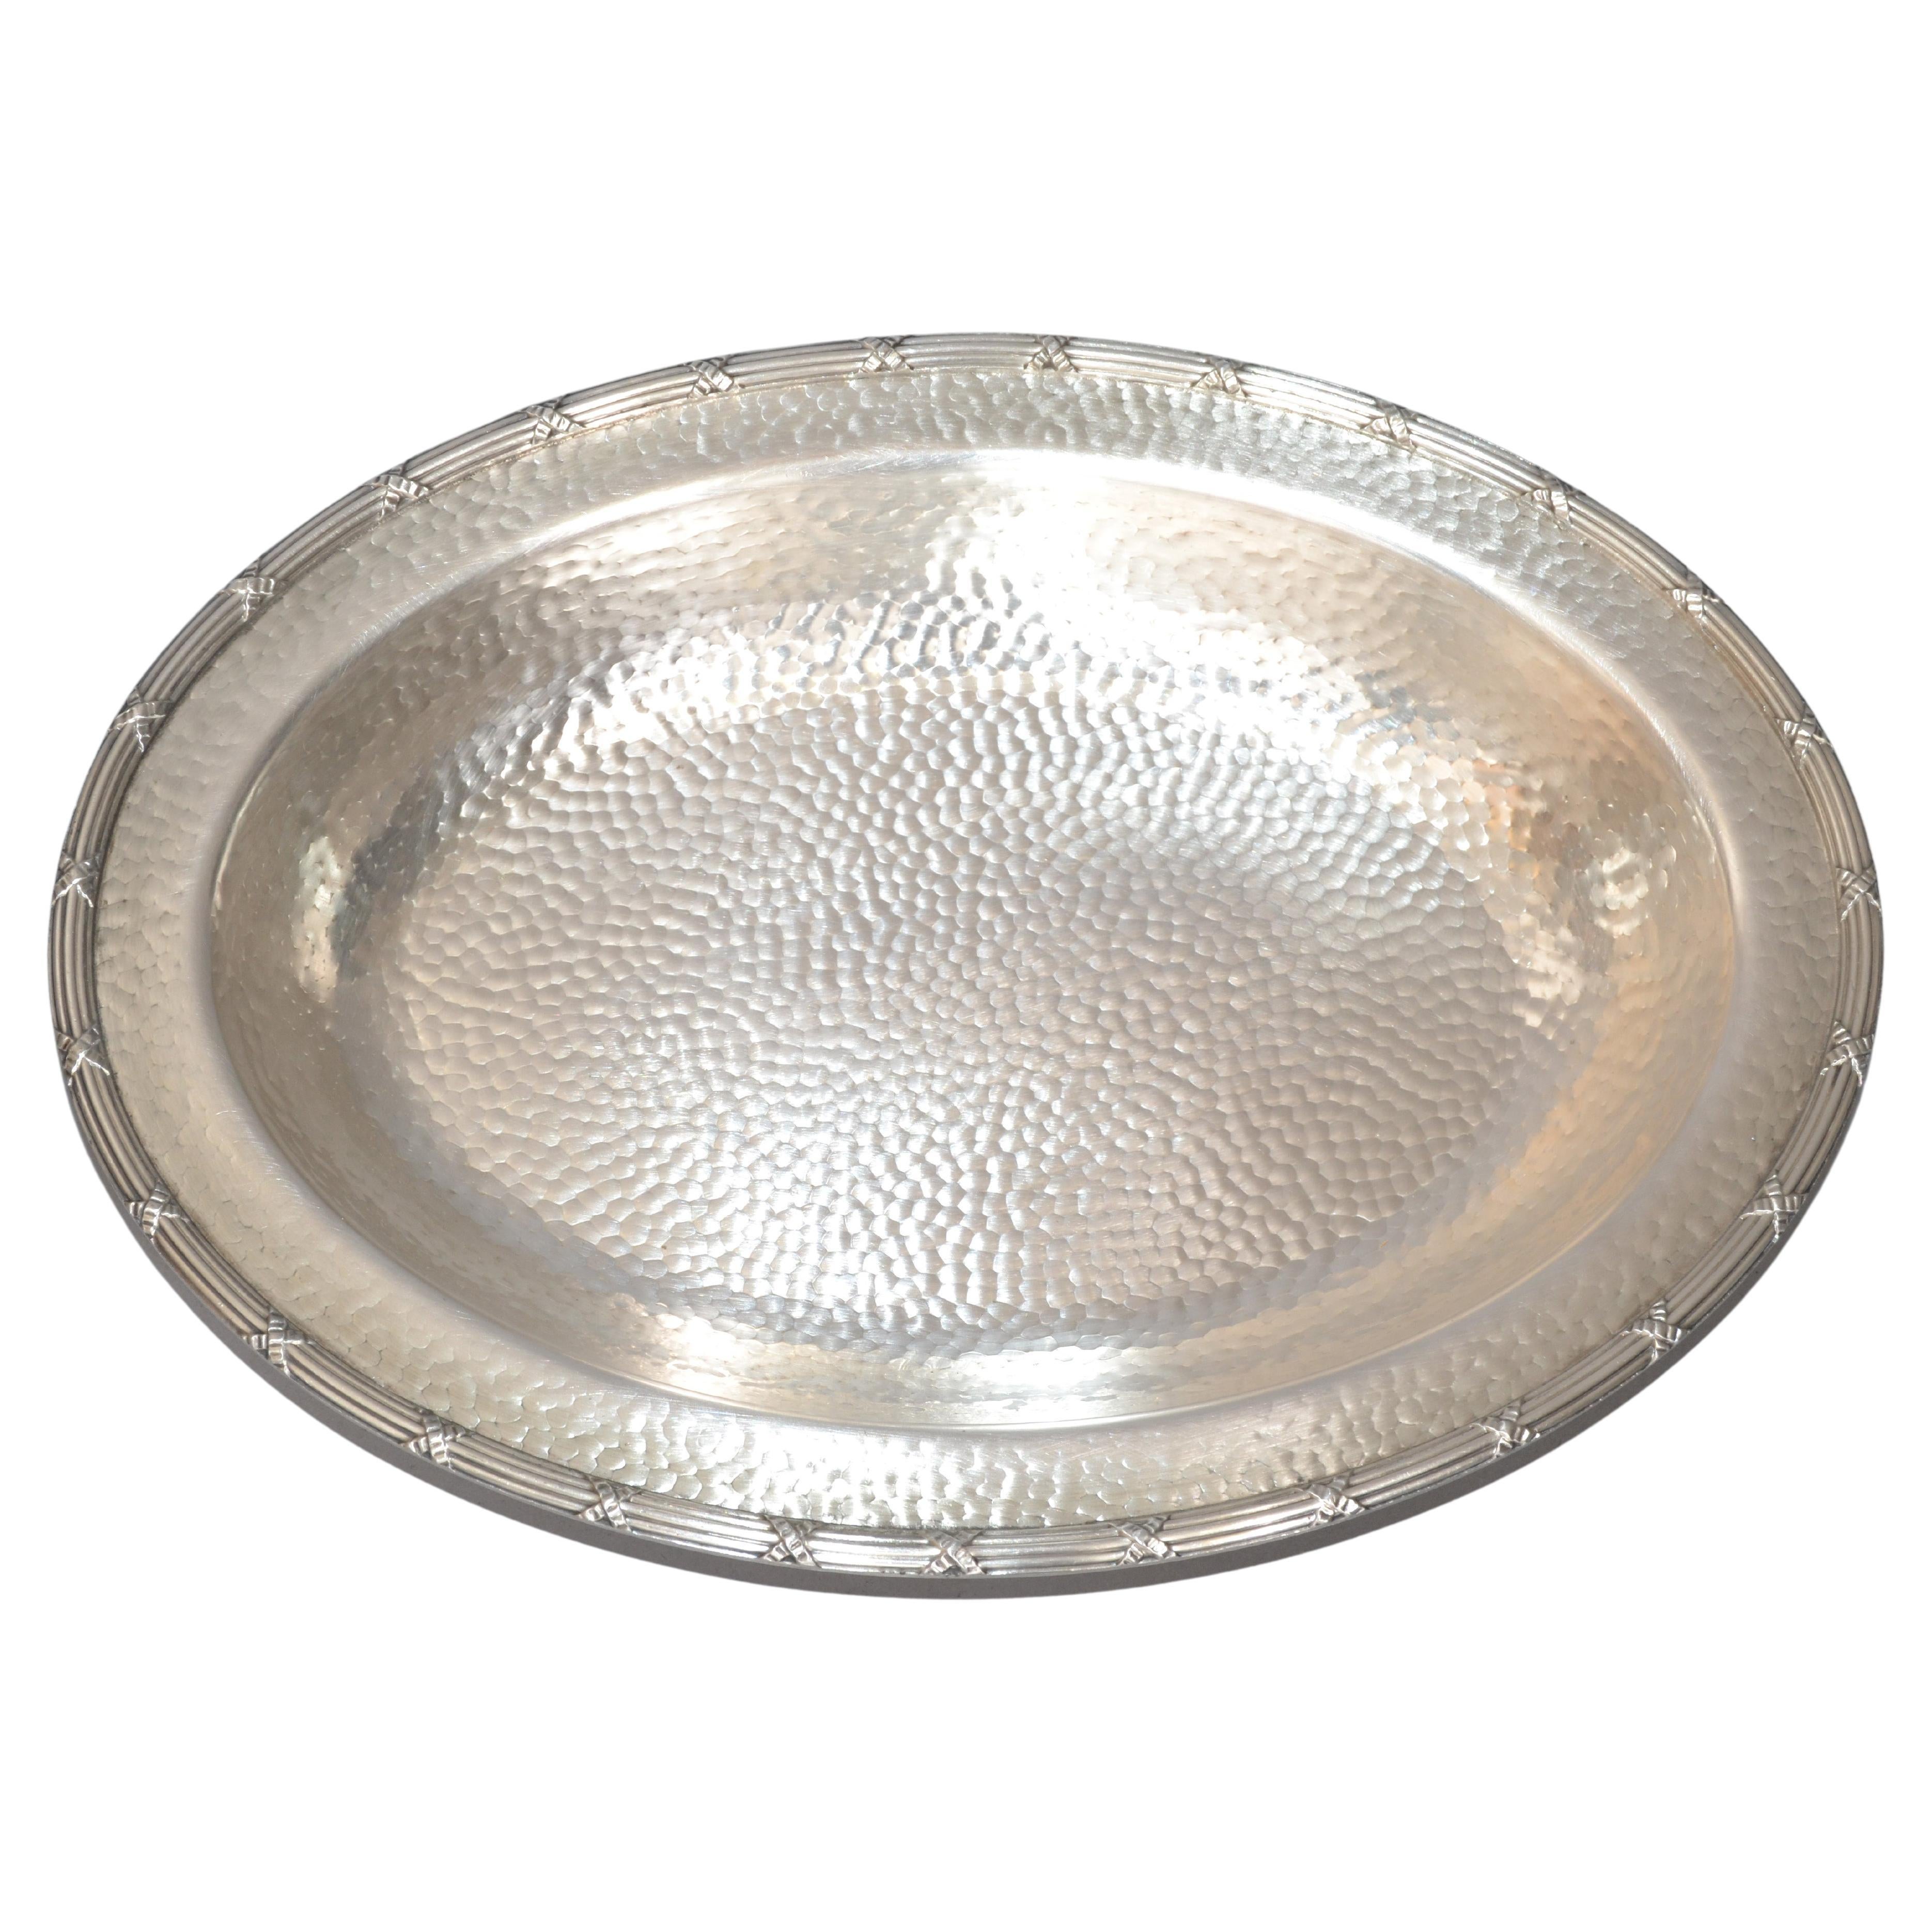 Art Deco 1969 Hand-Hammered Silver Plate EPNS 2245 Centerpiece Decorative Bowl For Sale